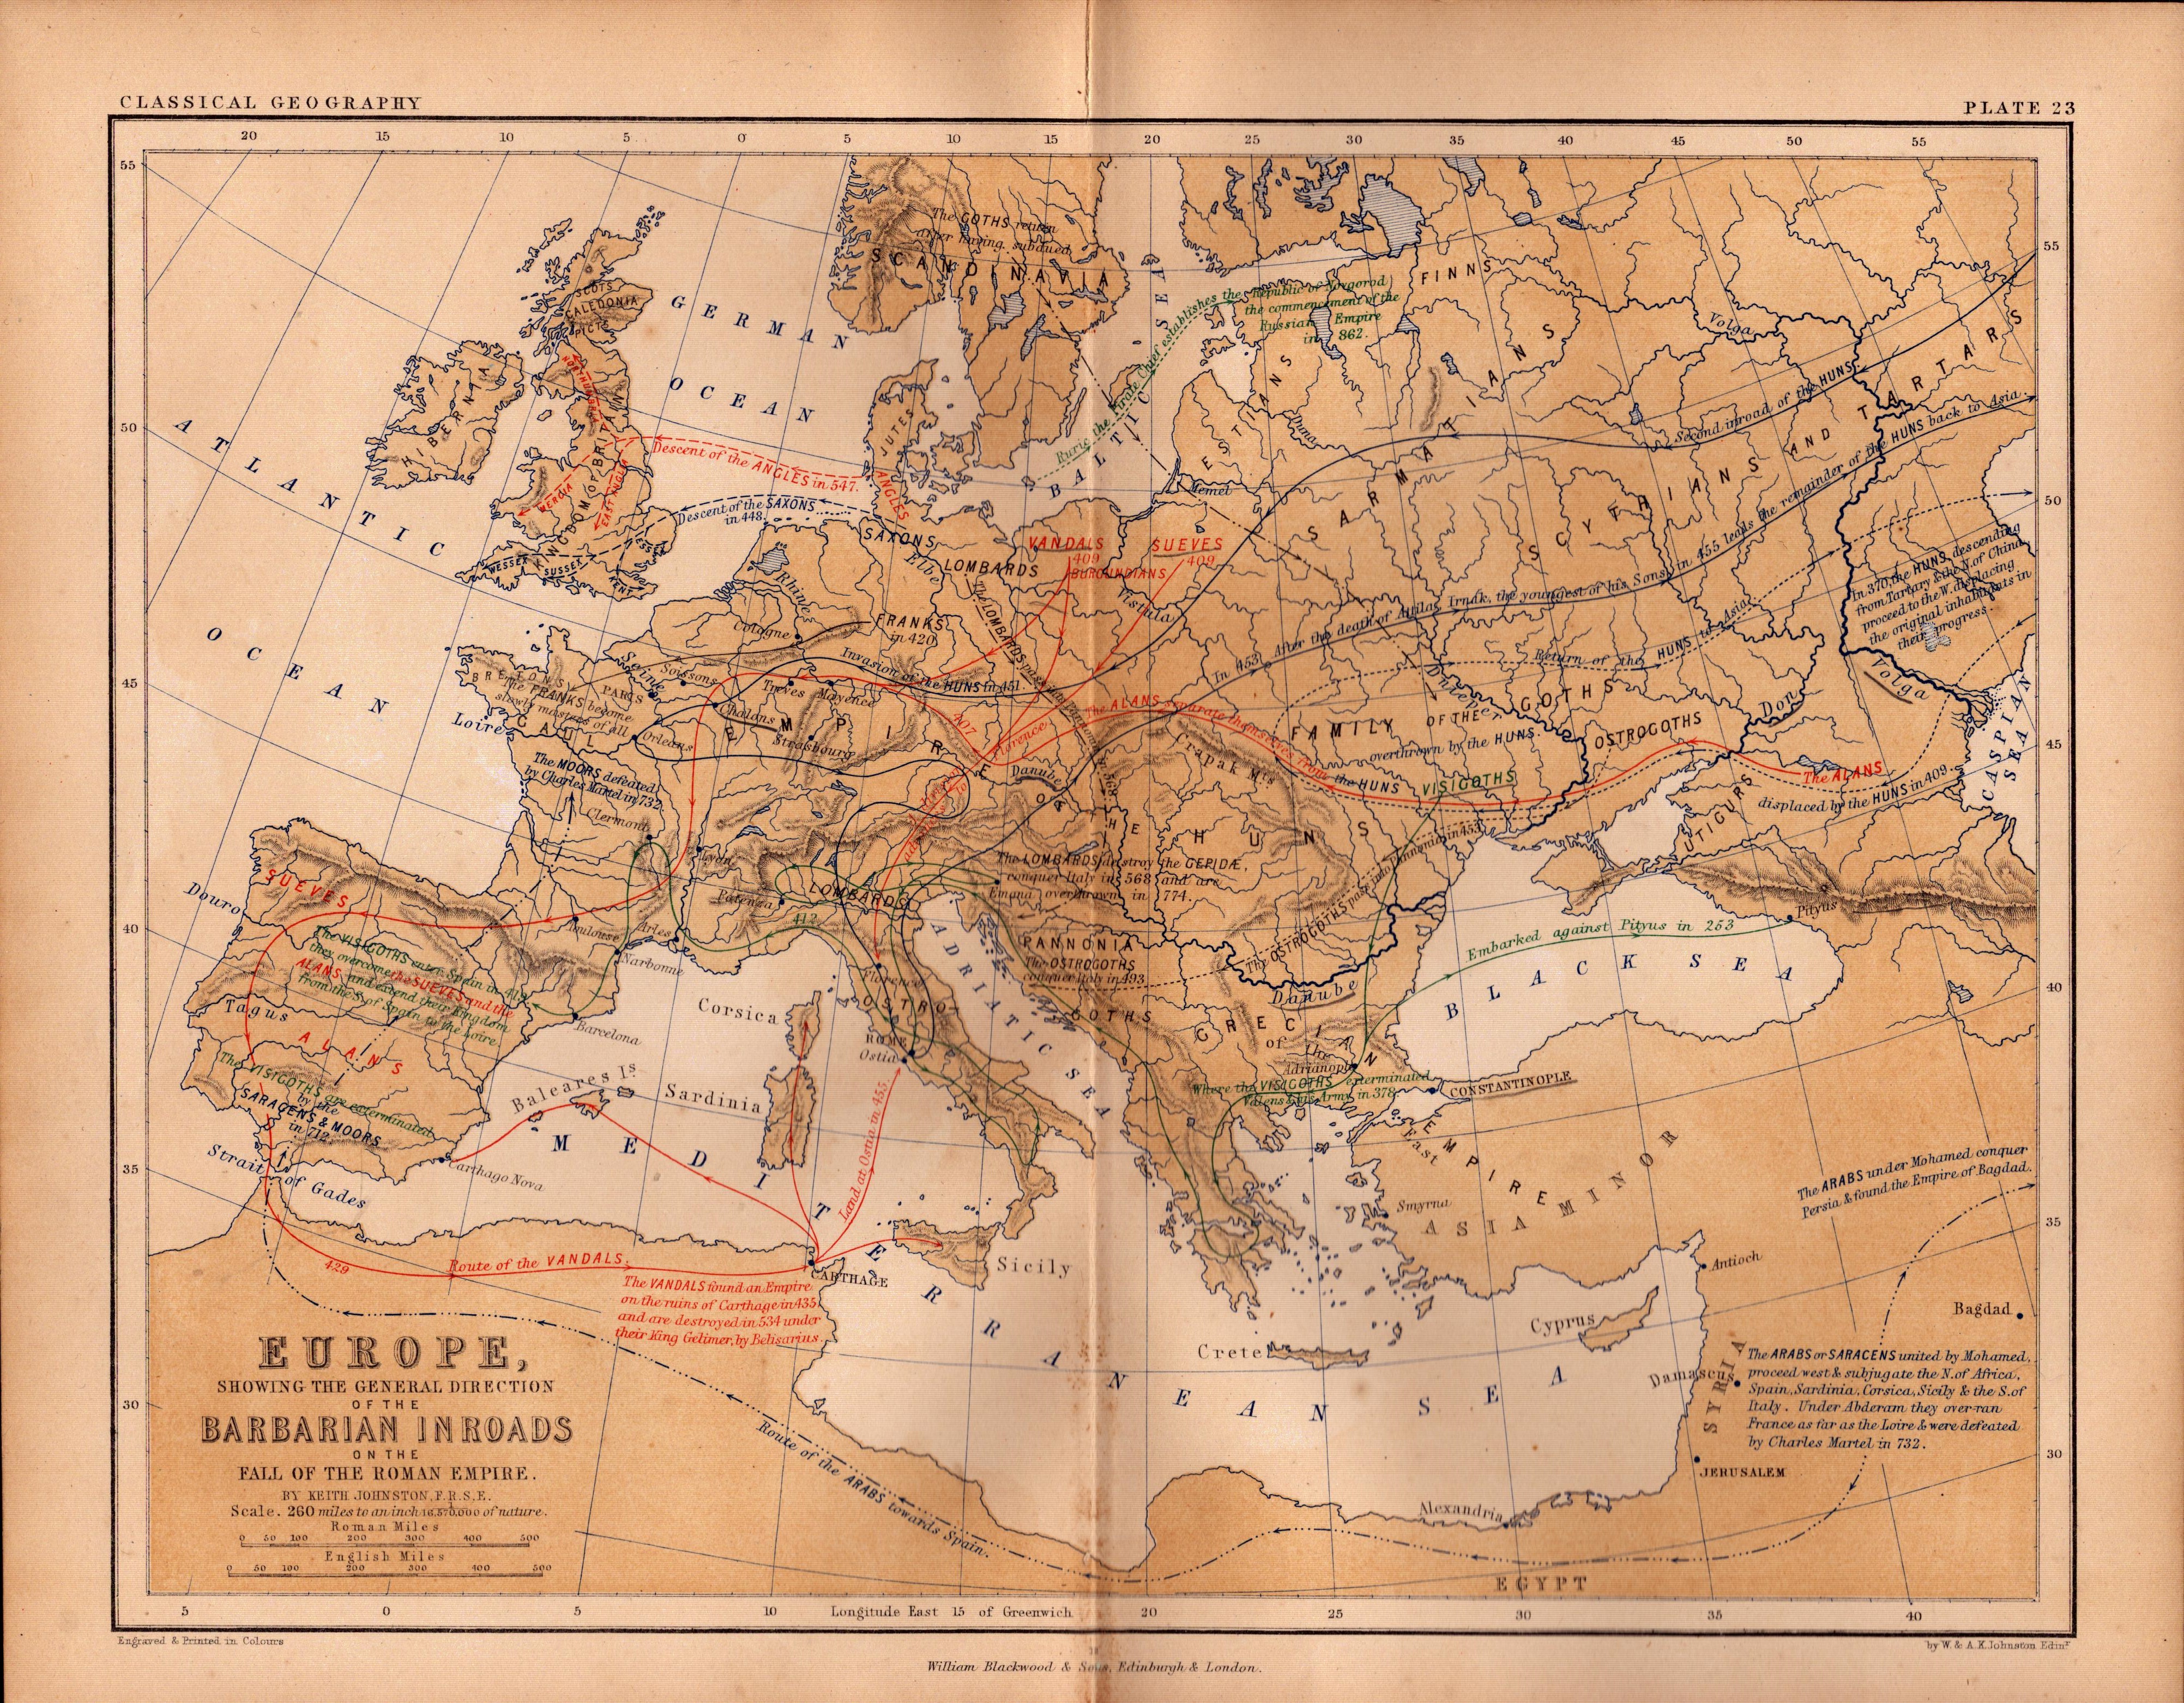 Antique 1867 Coloured Map Europe Barbarians Inroads, Fall Rome Empire.